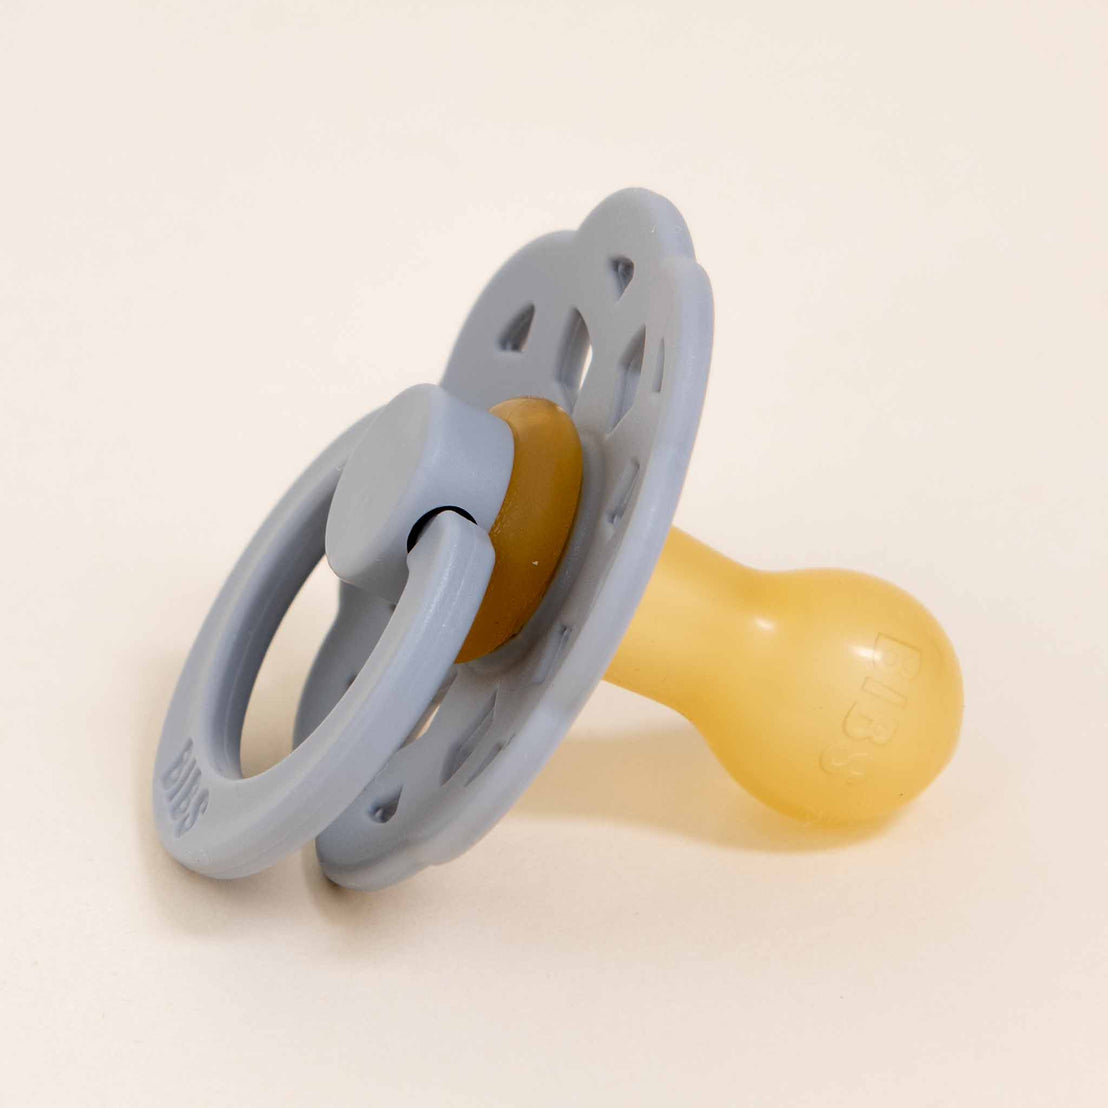 A Bibs Lace Pacifier in Cloud with a gray handle and yellow nipple, placed on a light beige background.